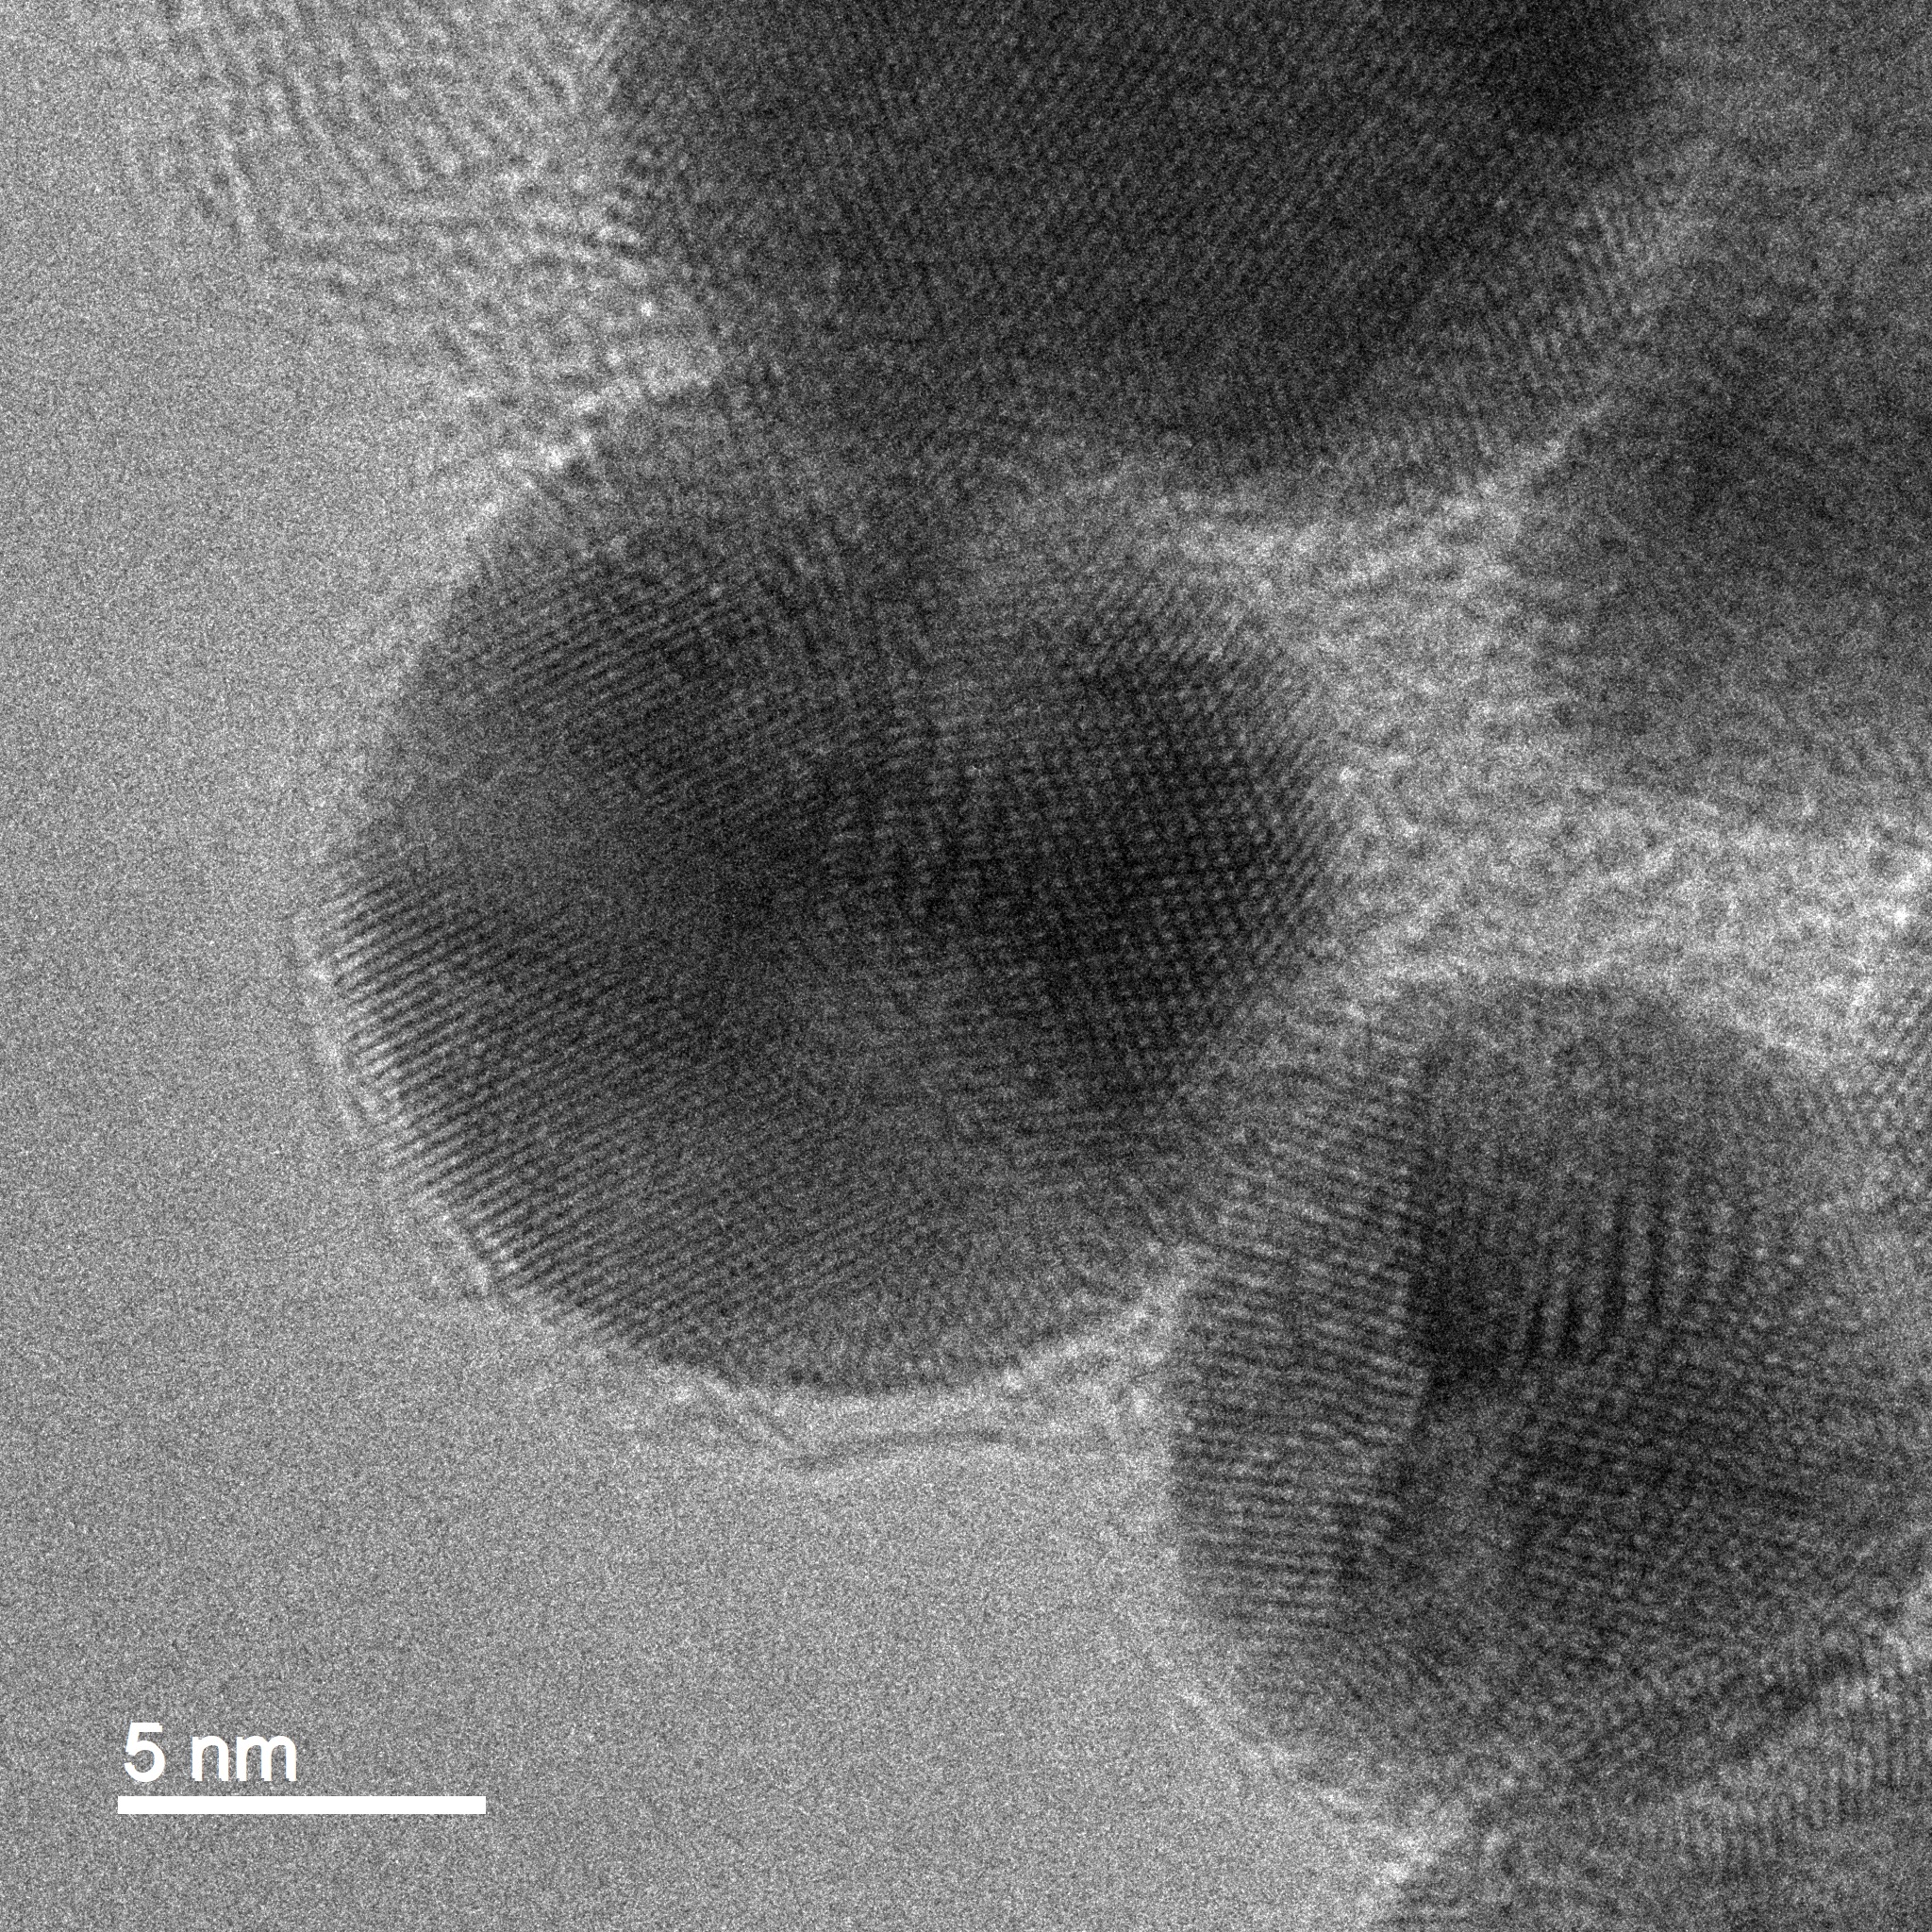 TEM image of gold nanoparticles